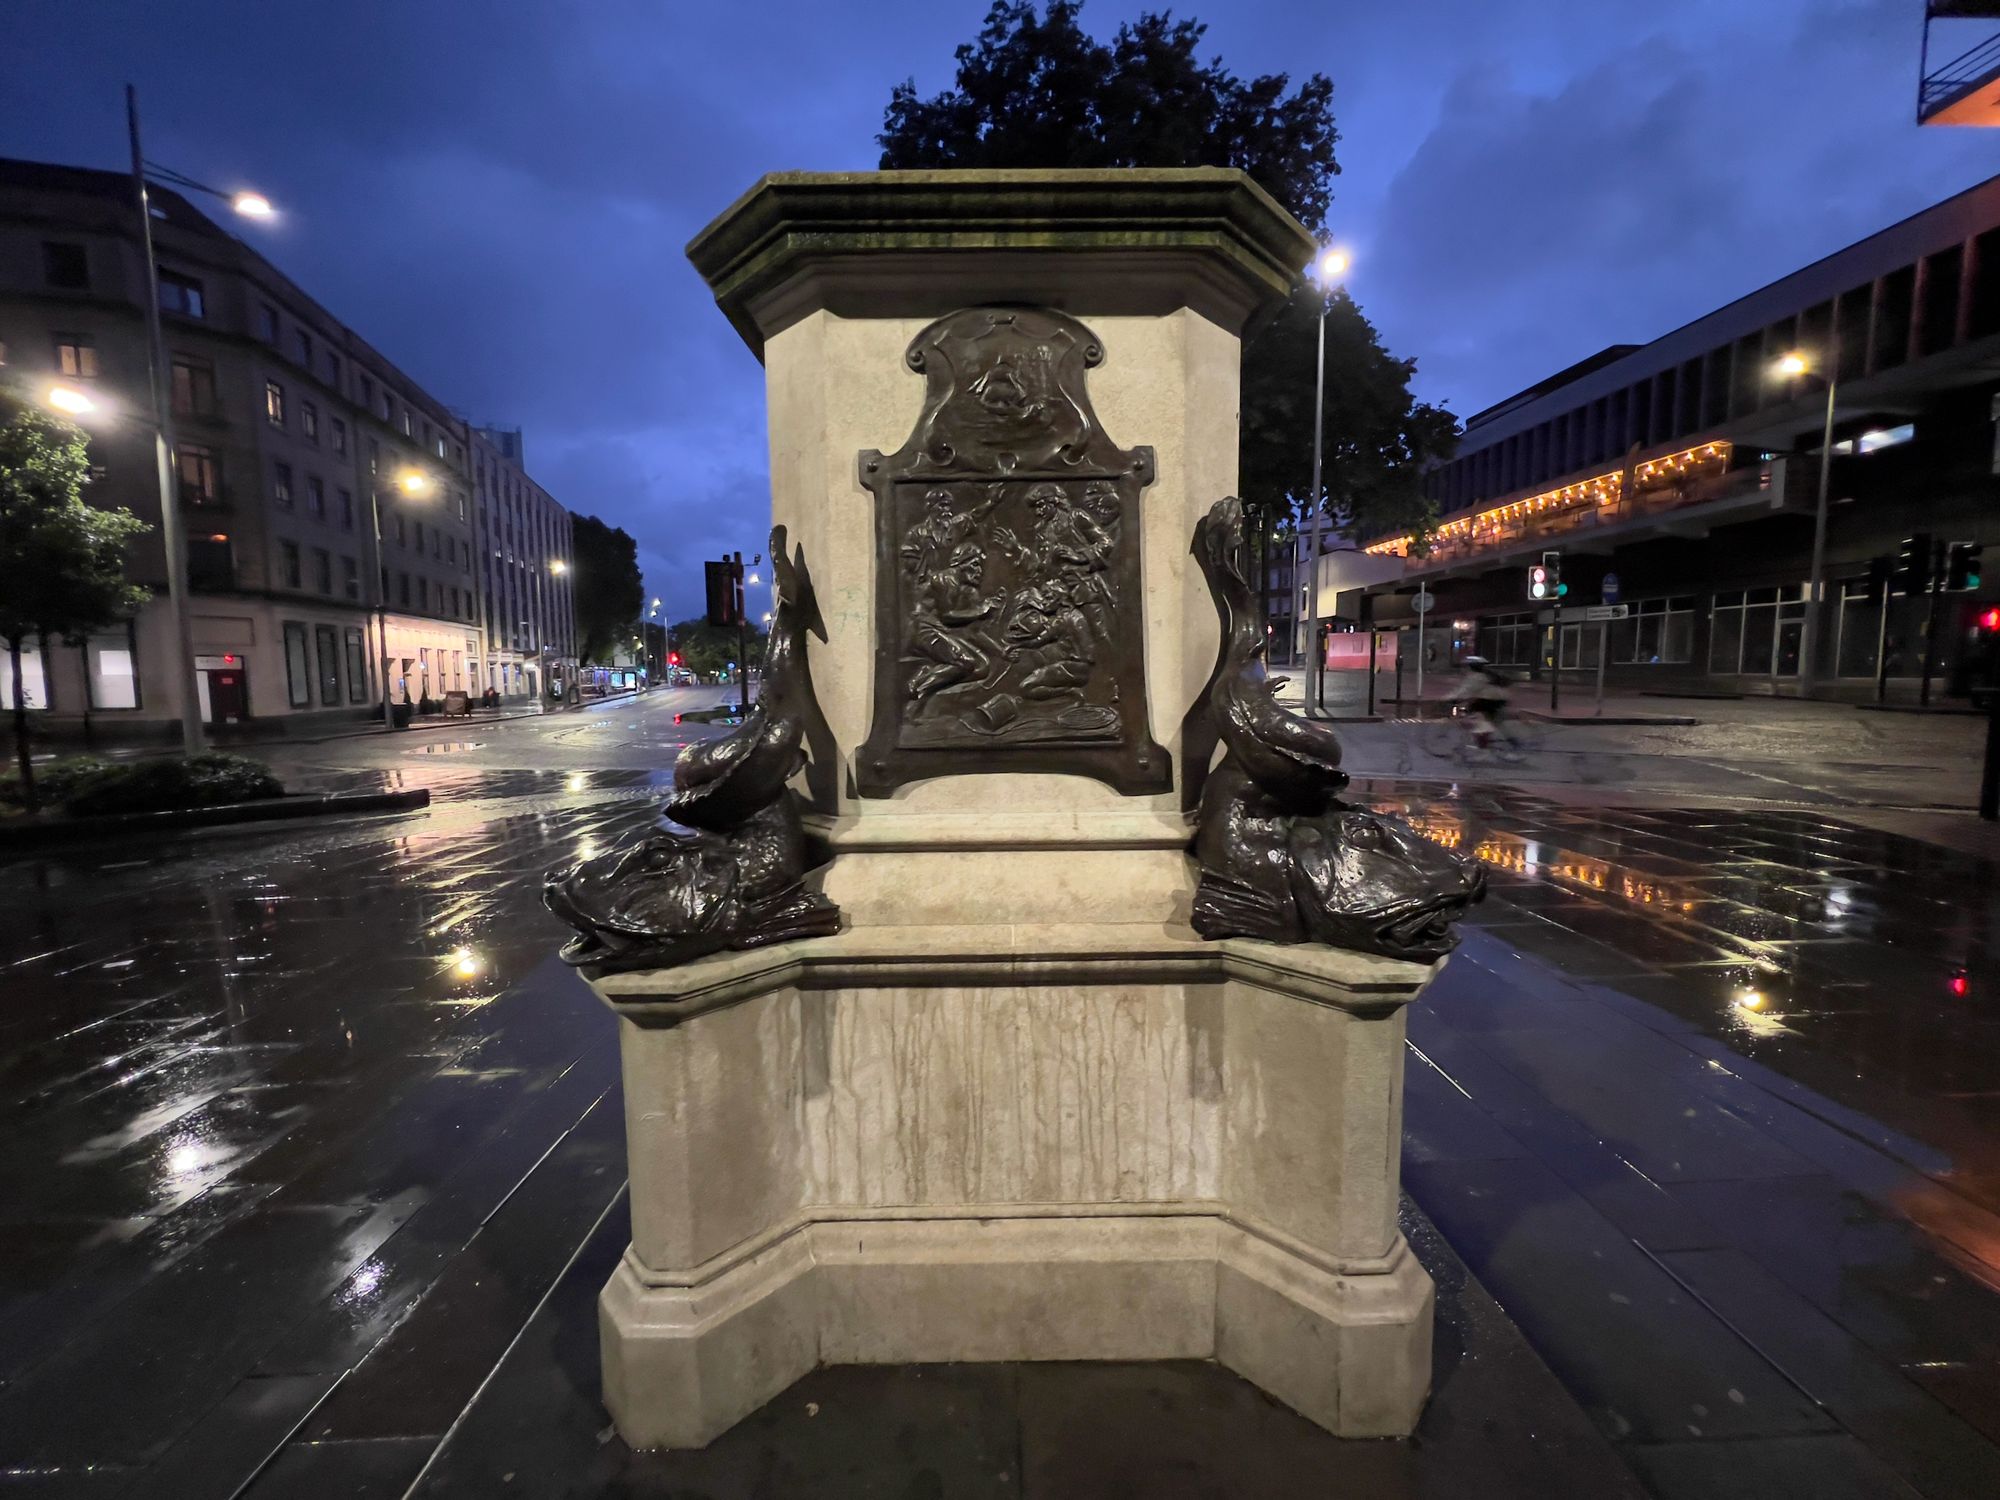 An empty statue plinth on a rainy square with ornate carvings. The statue (of slaver Edward Colston) is missing.